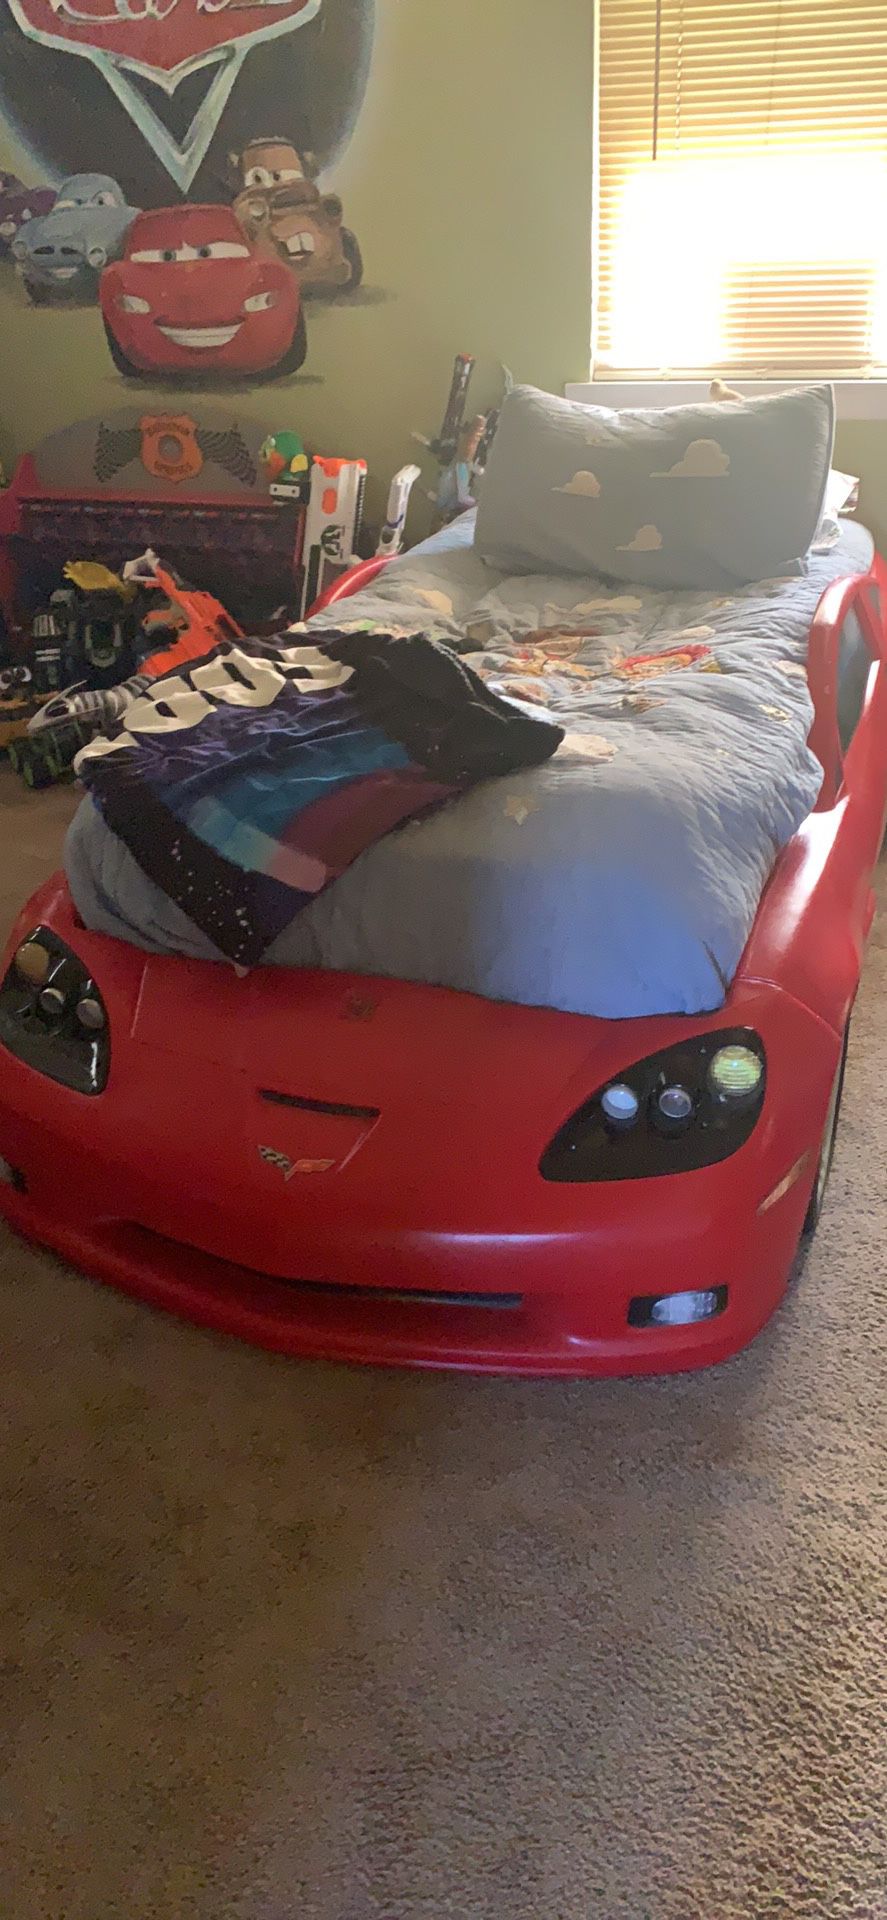 Corvette bed fame an toy storage